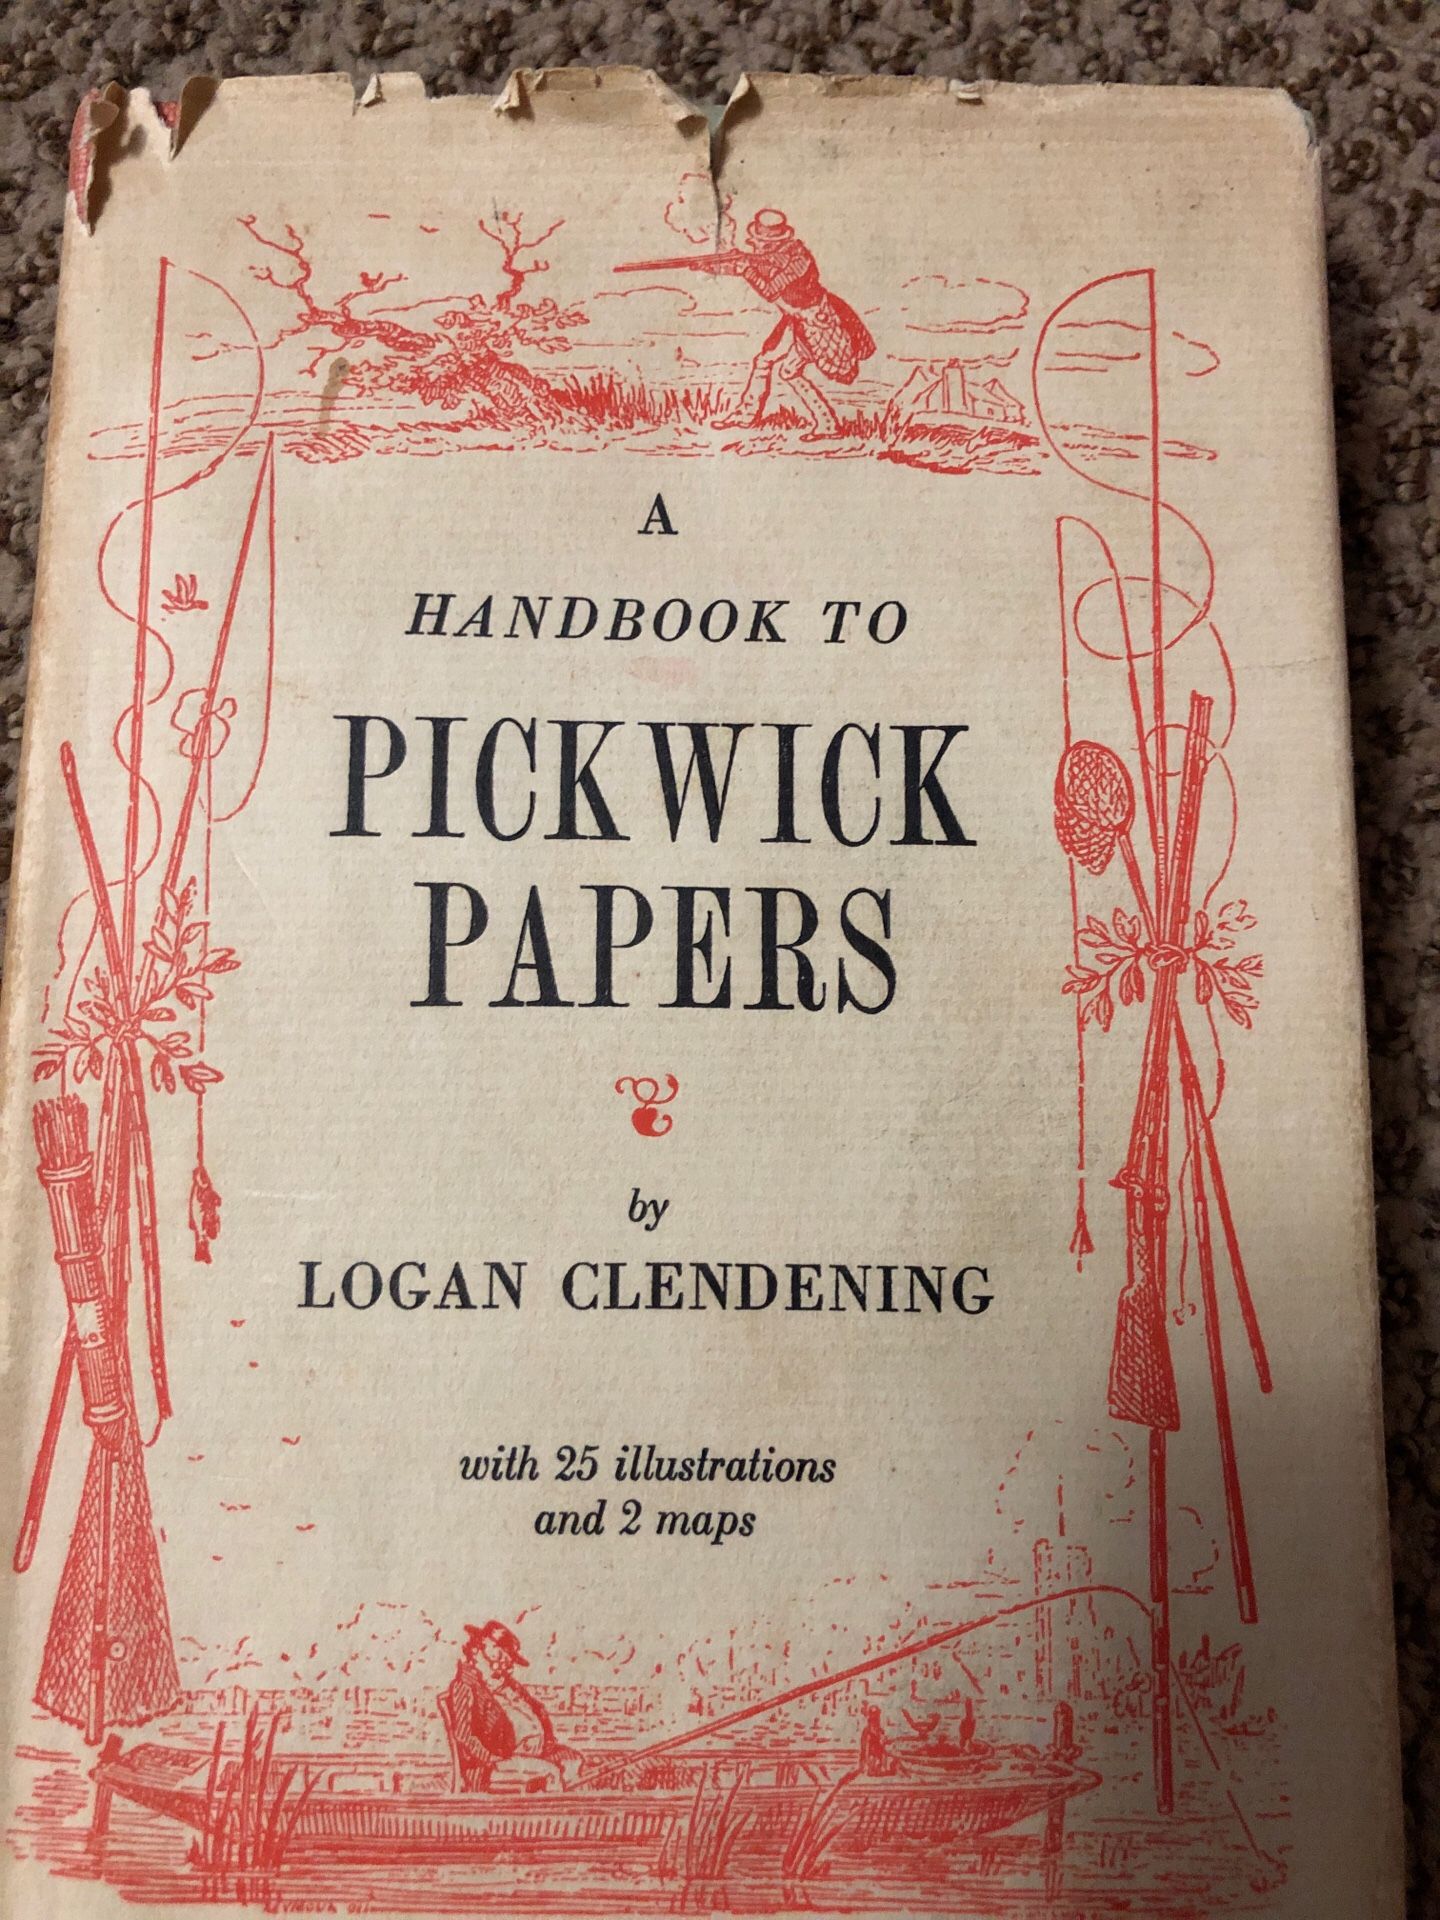 A Handbook To Pickwick Papers. By Logan Clendening. First Edition